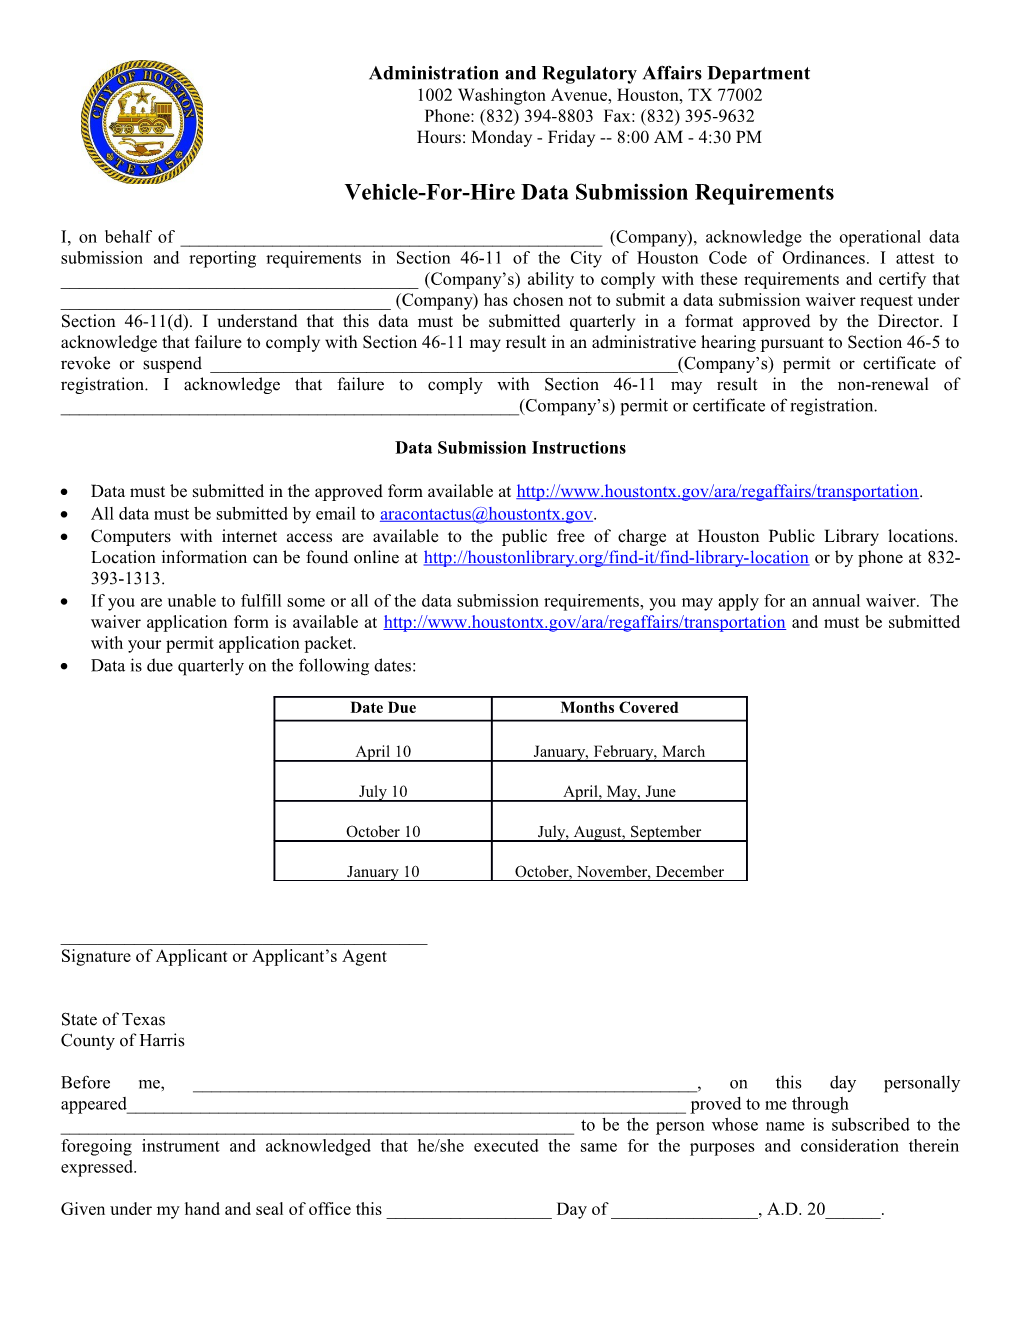 Vehicle-For-Hire Data Submission Requirements